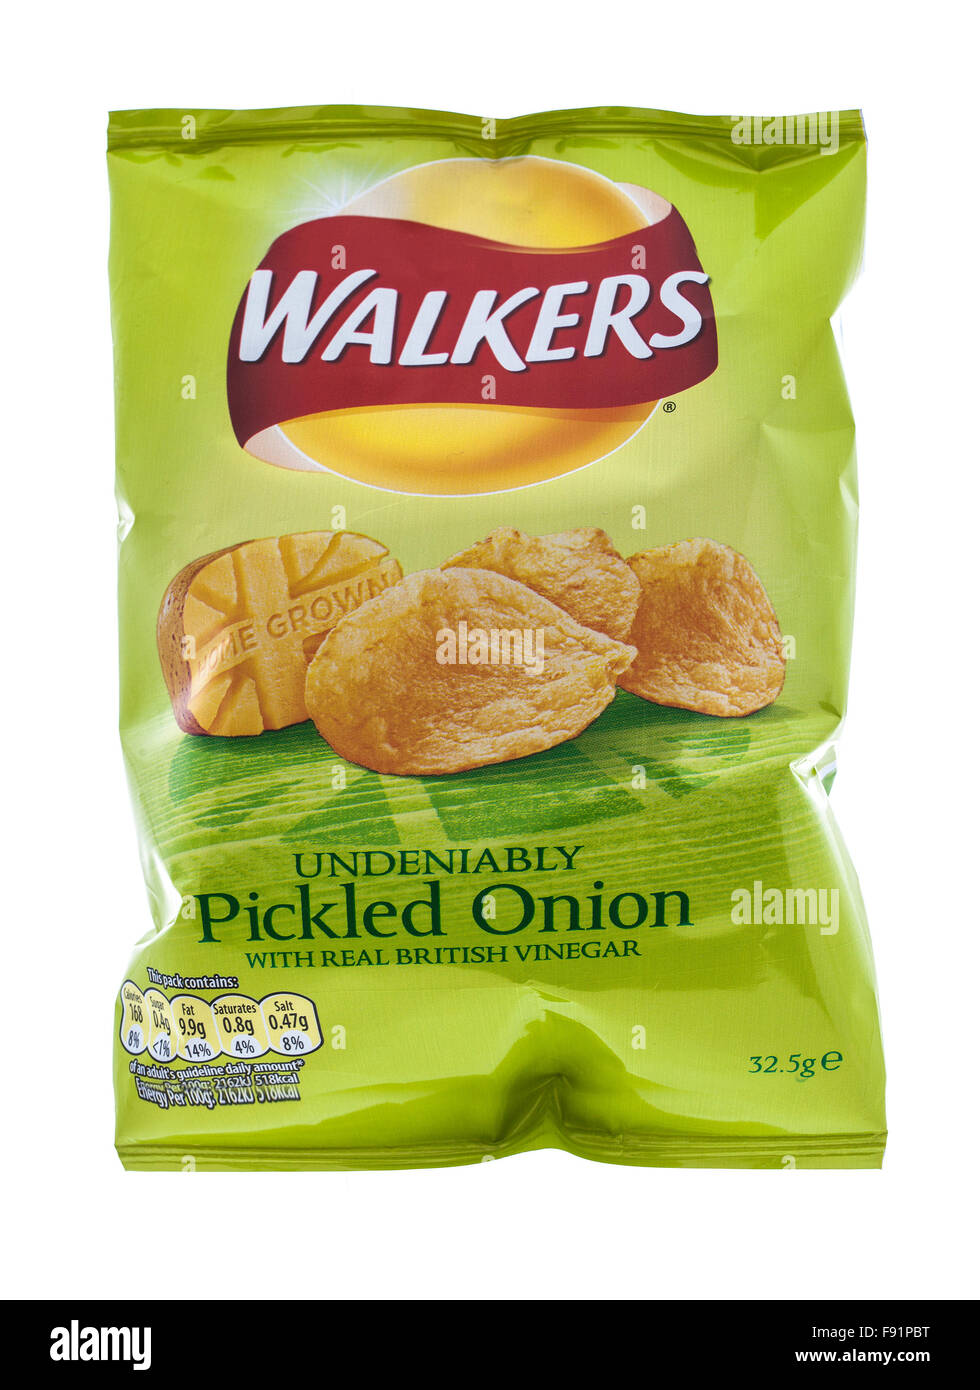 Packet Of Walkers Pickled Onion Crisps on a White Background Stock Photo